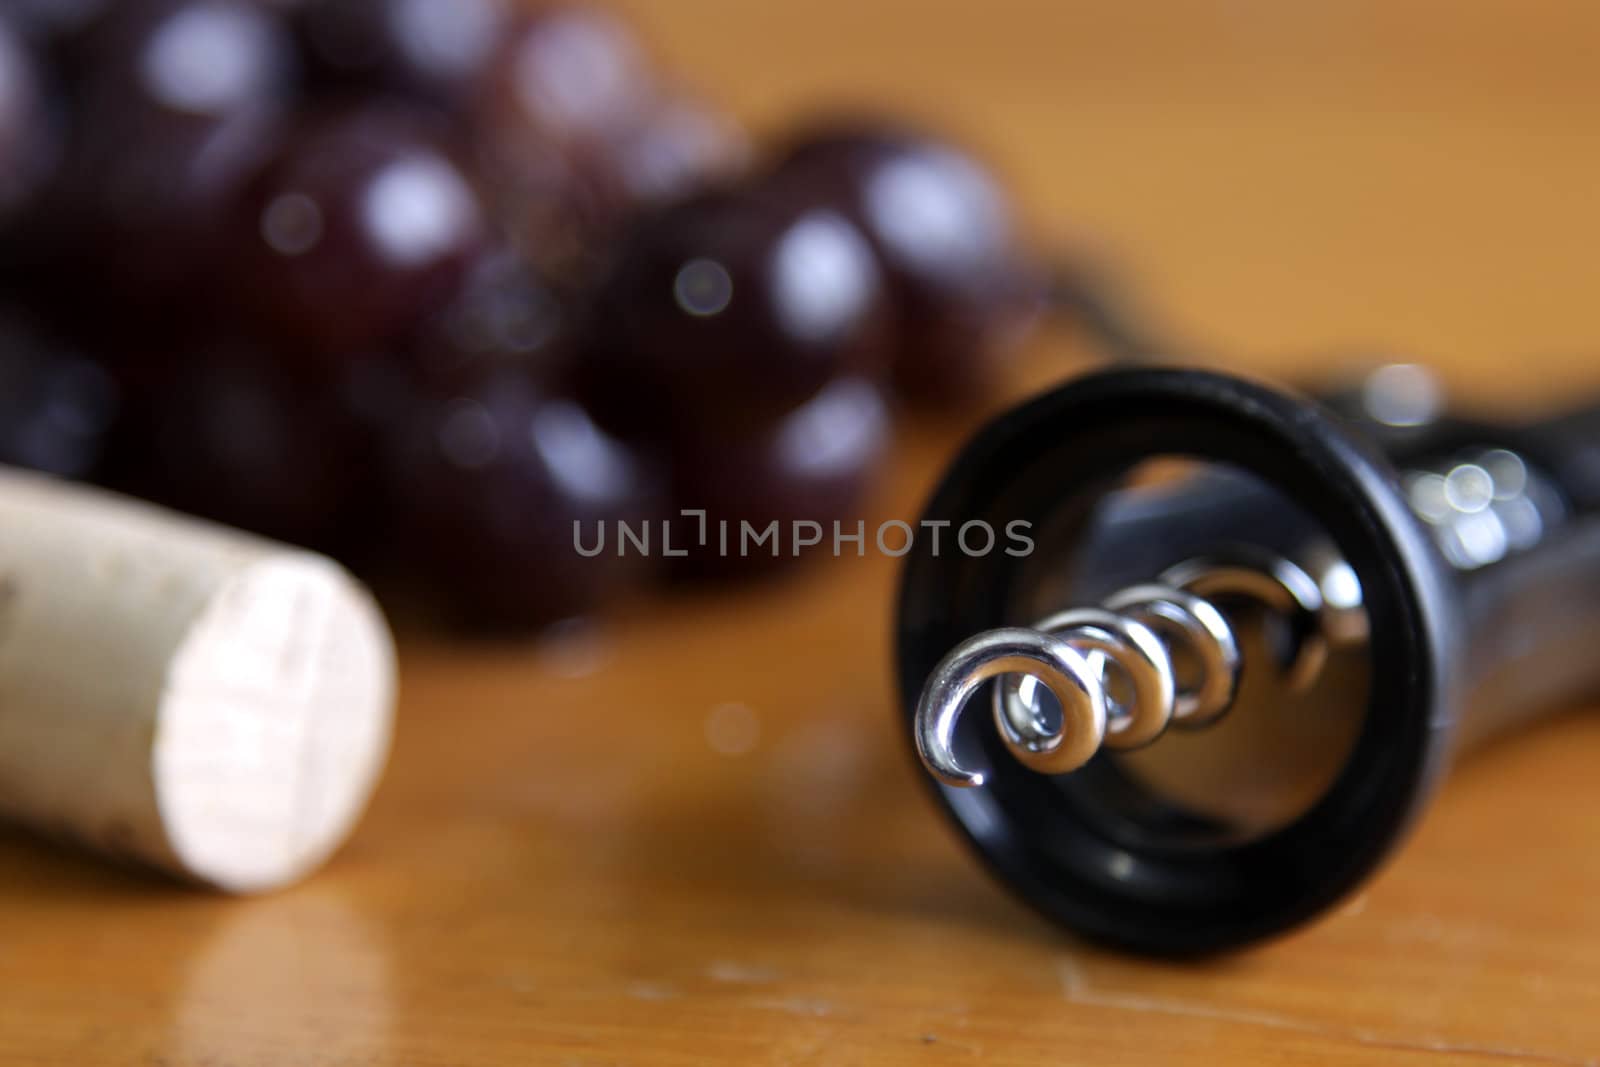 A cluster of juicy red grapes on a wood table, along with a corkscrew and a cork.
